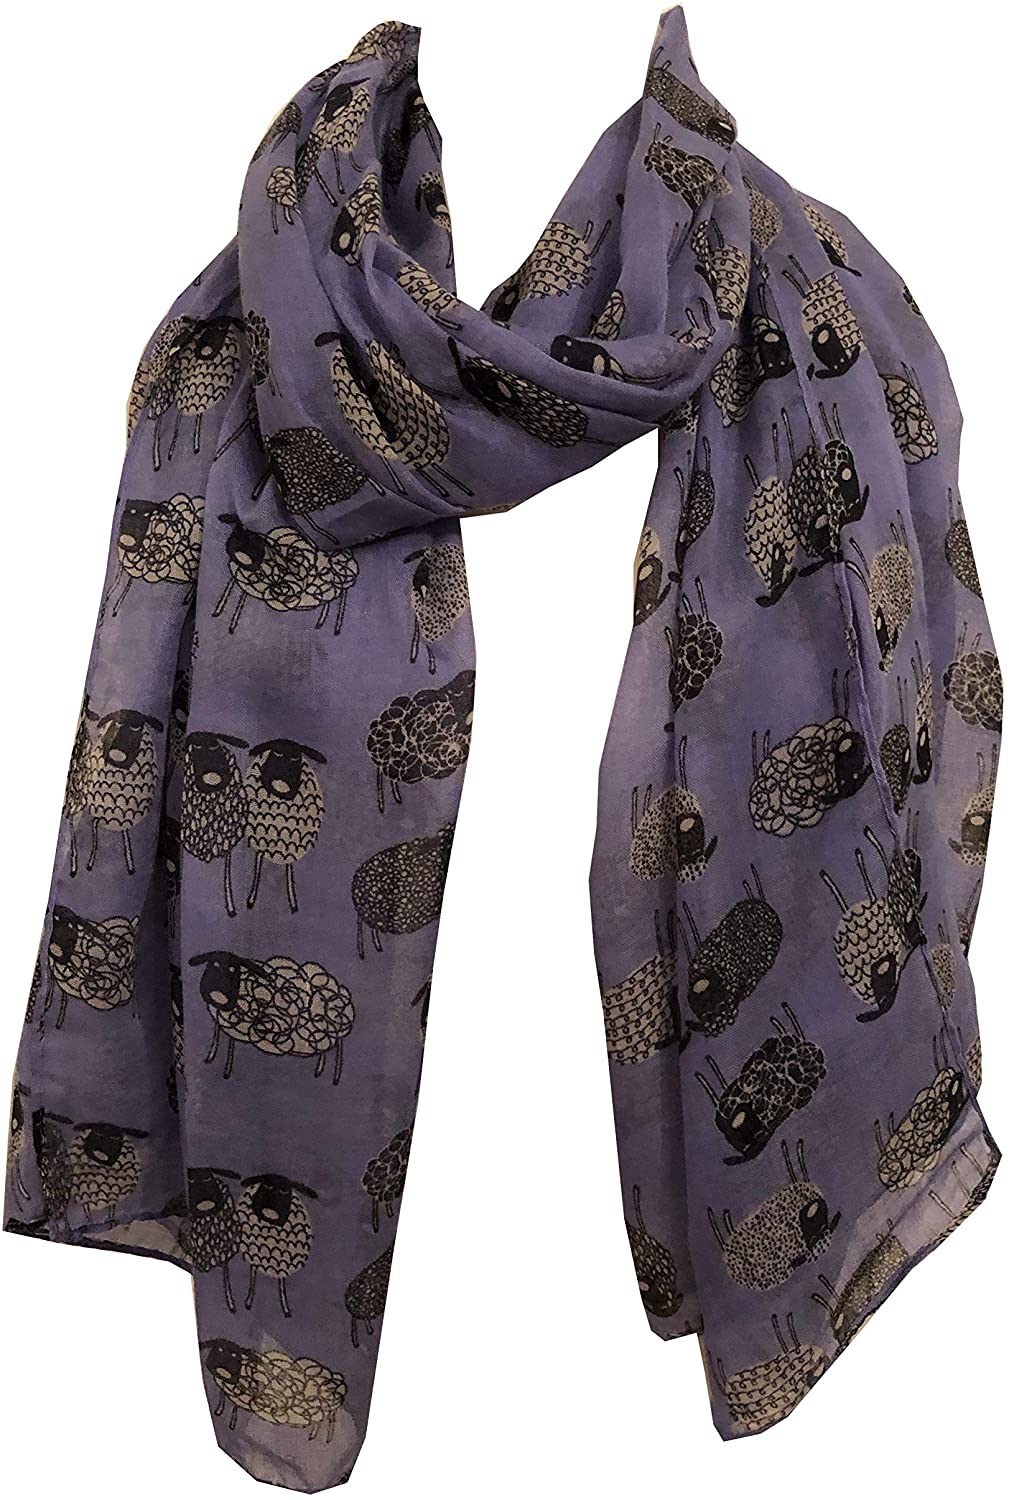 Pamper Yourself Now Light Purple Sketched Sheep Design Long Scarf